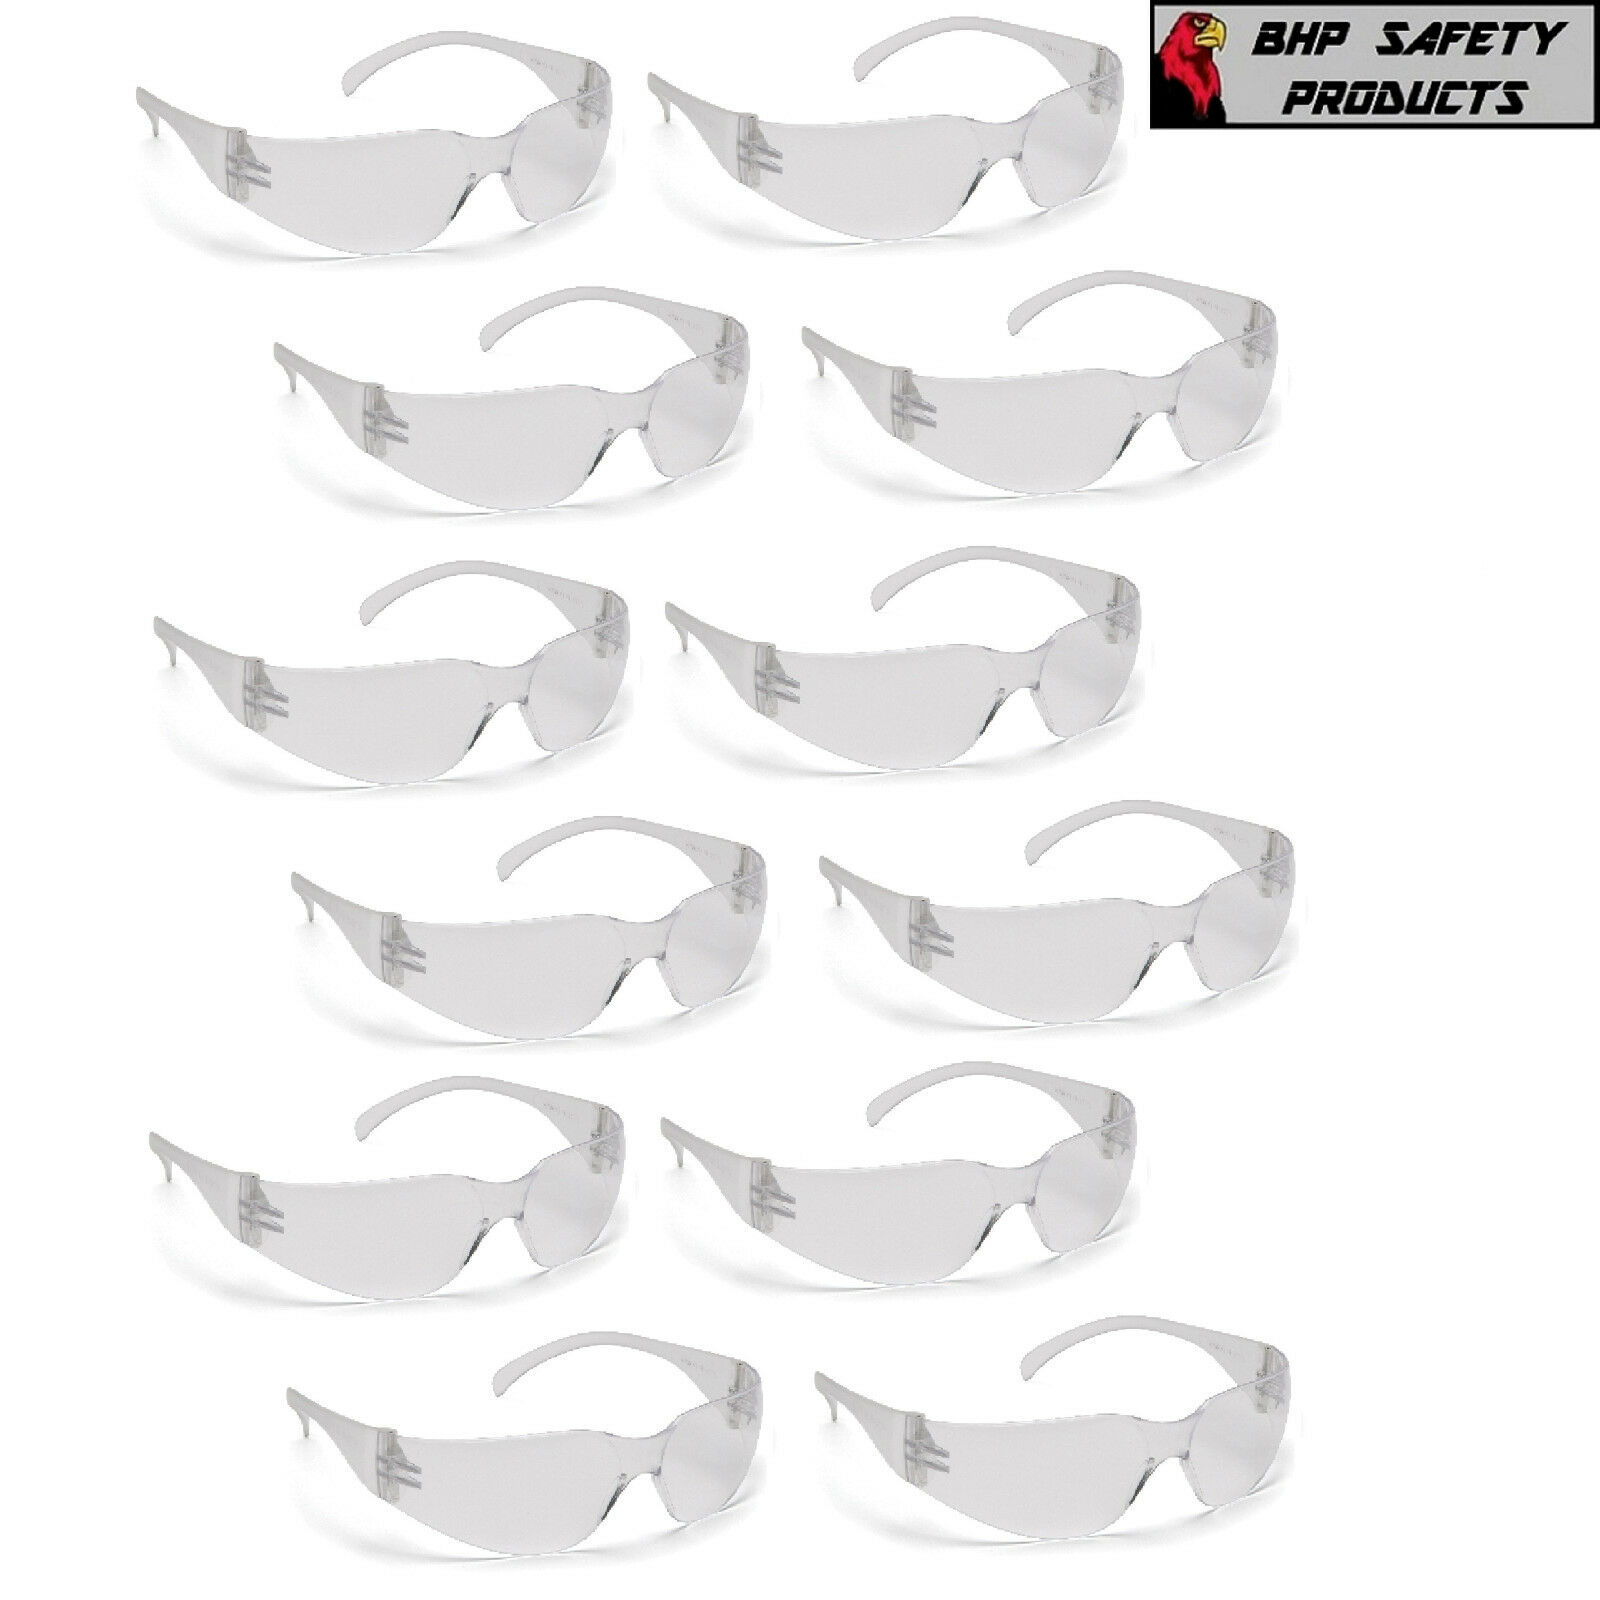 PYRAMEX GOLIATH SAFETY GLASSES MOTORCYCLE SPORT WORK SUNGLASSES Z87+ (1  PAIR)